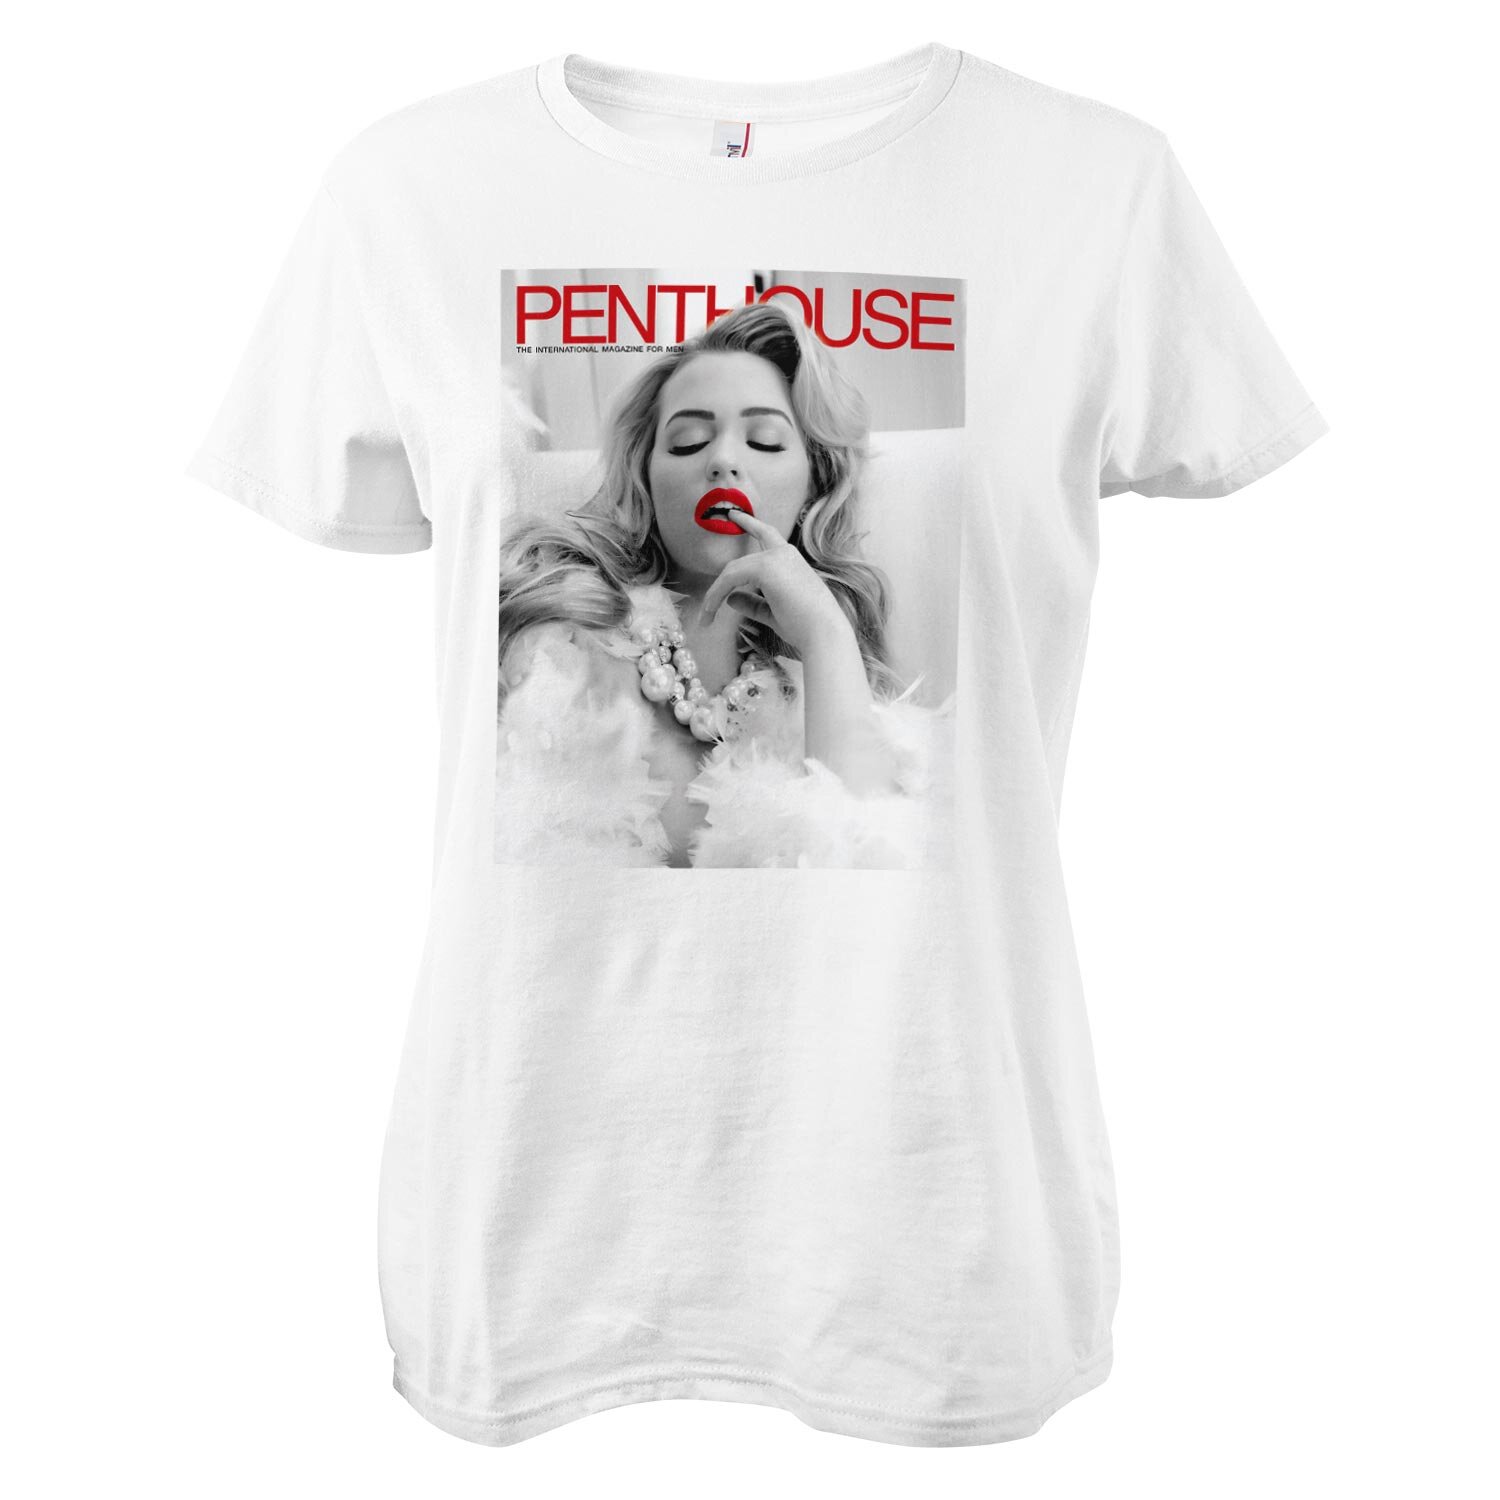 Penthouse October 2016 Cover Girly Tee